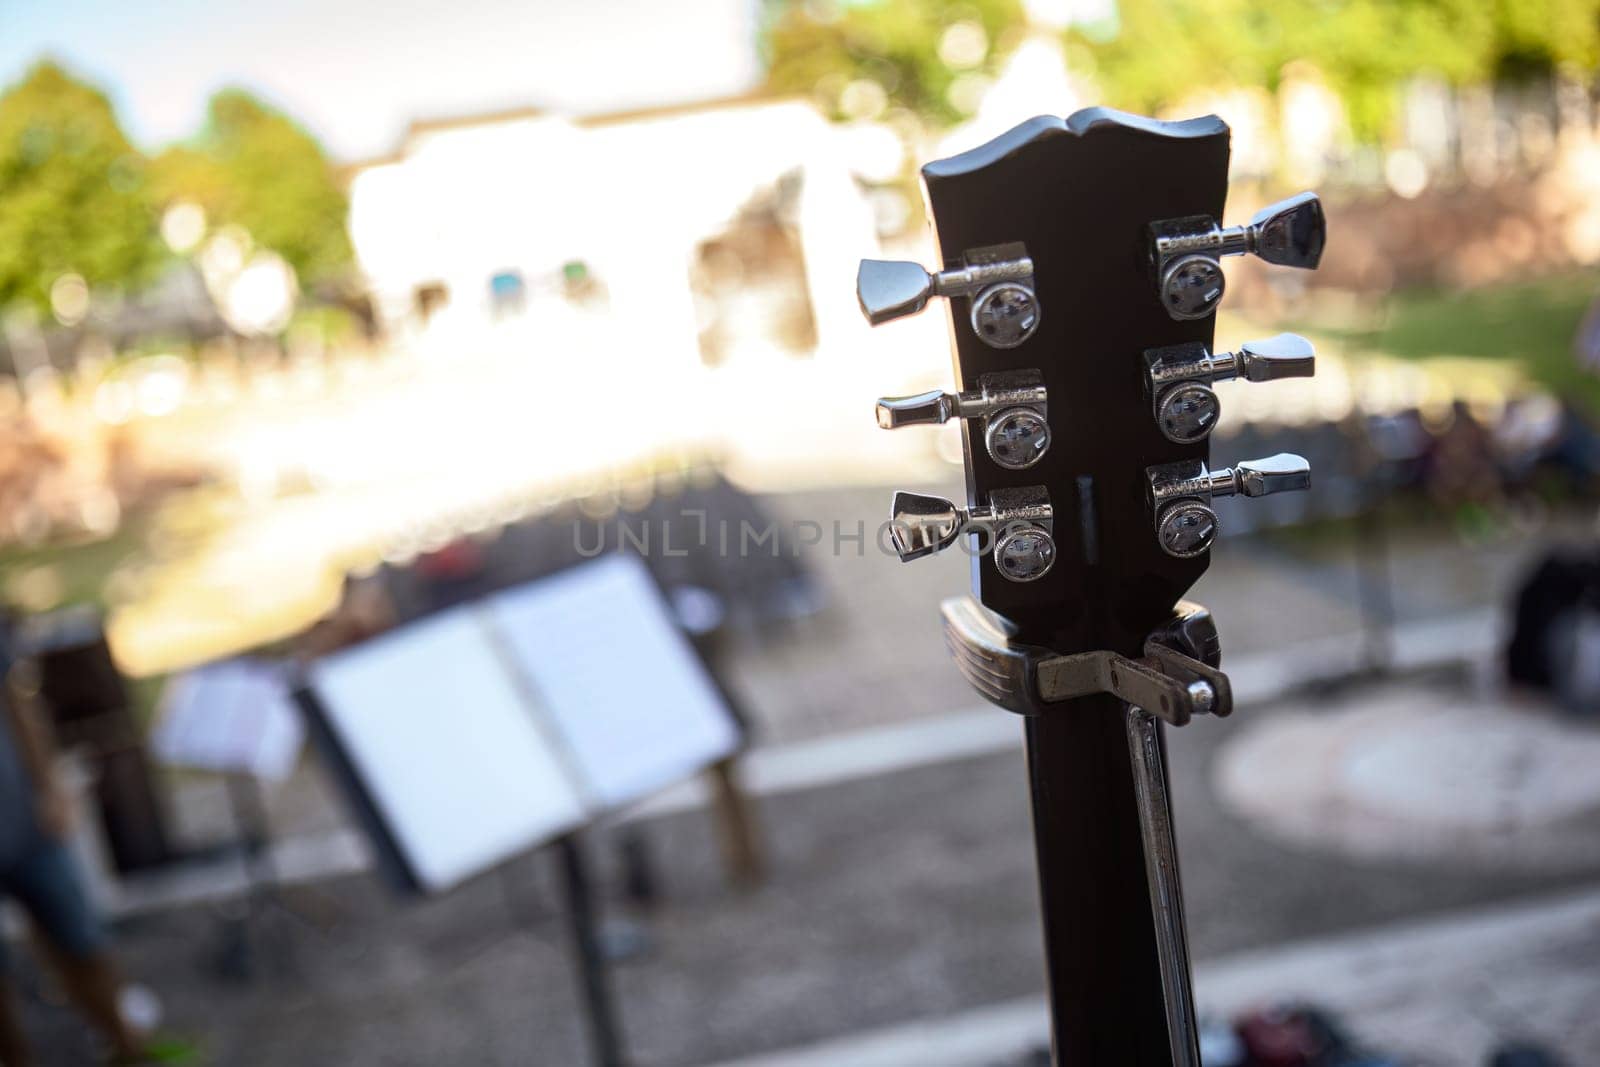 Guitar Poised for Live Concert by pippocarlot